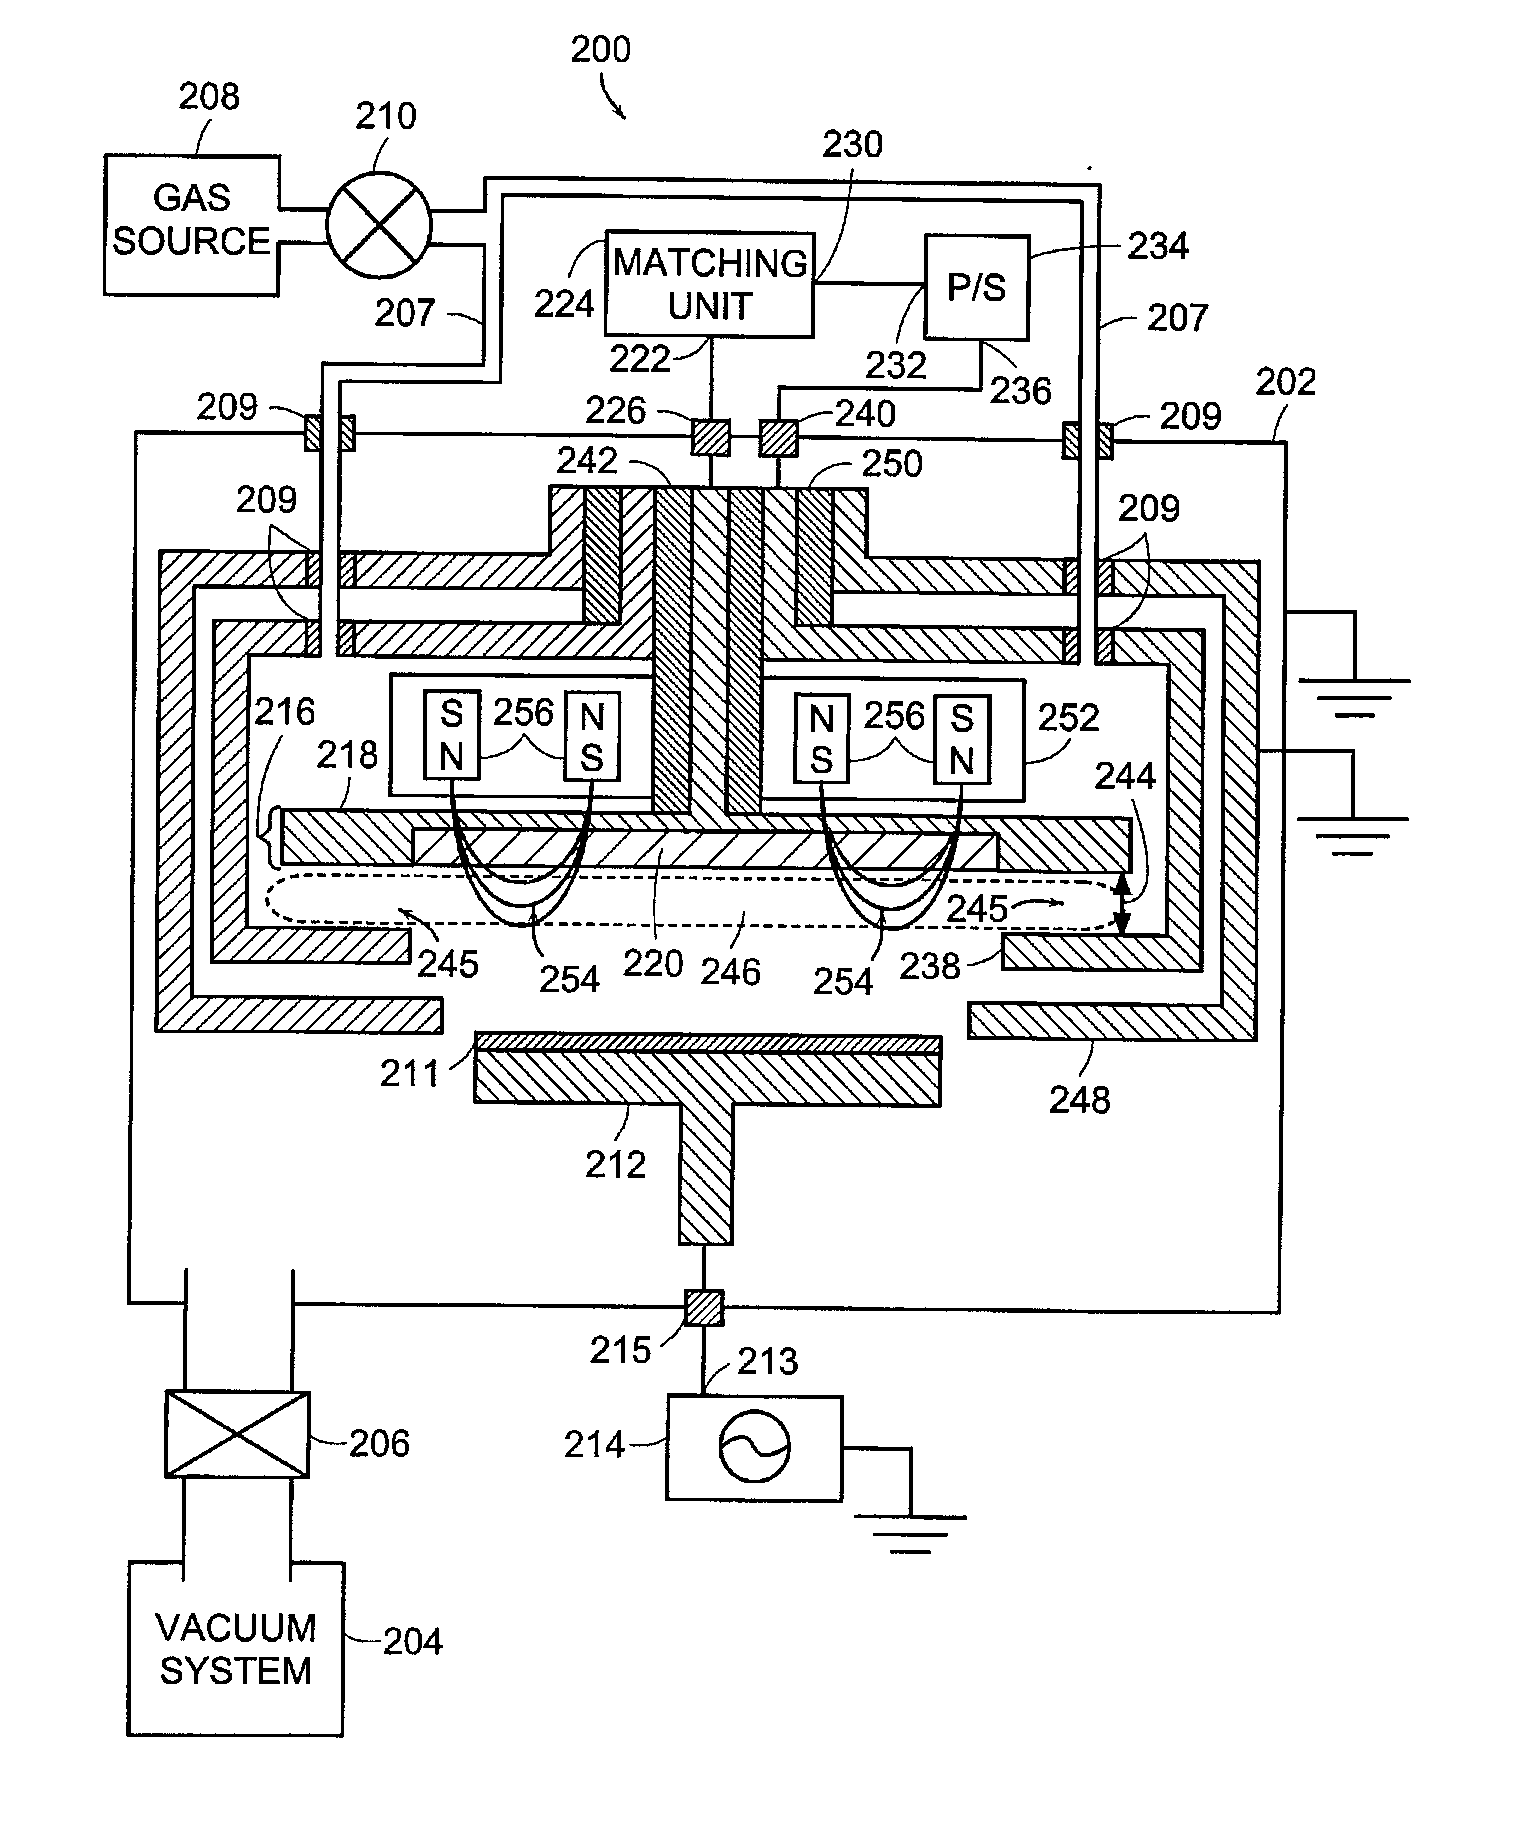 High-Power Pulsed Magnetron Sputtering